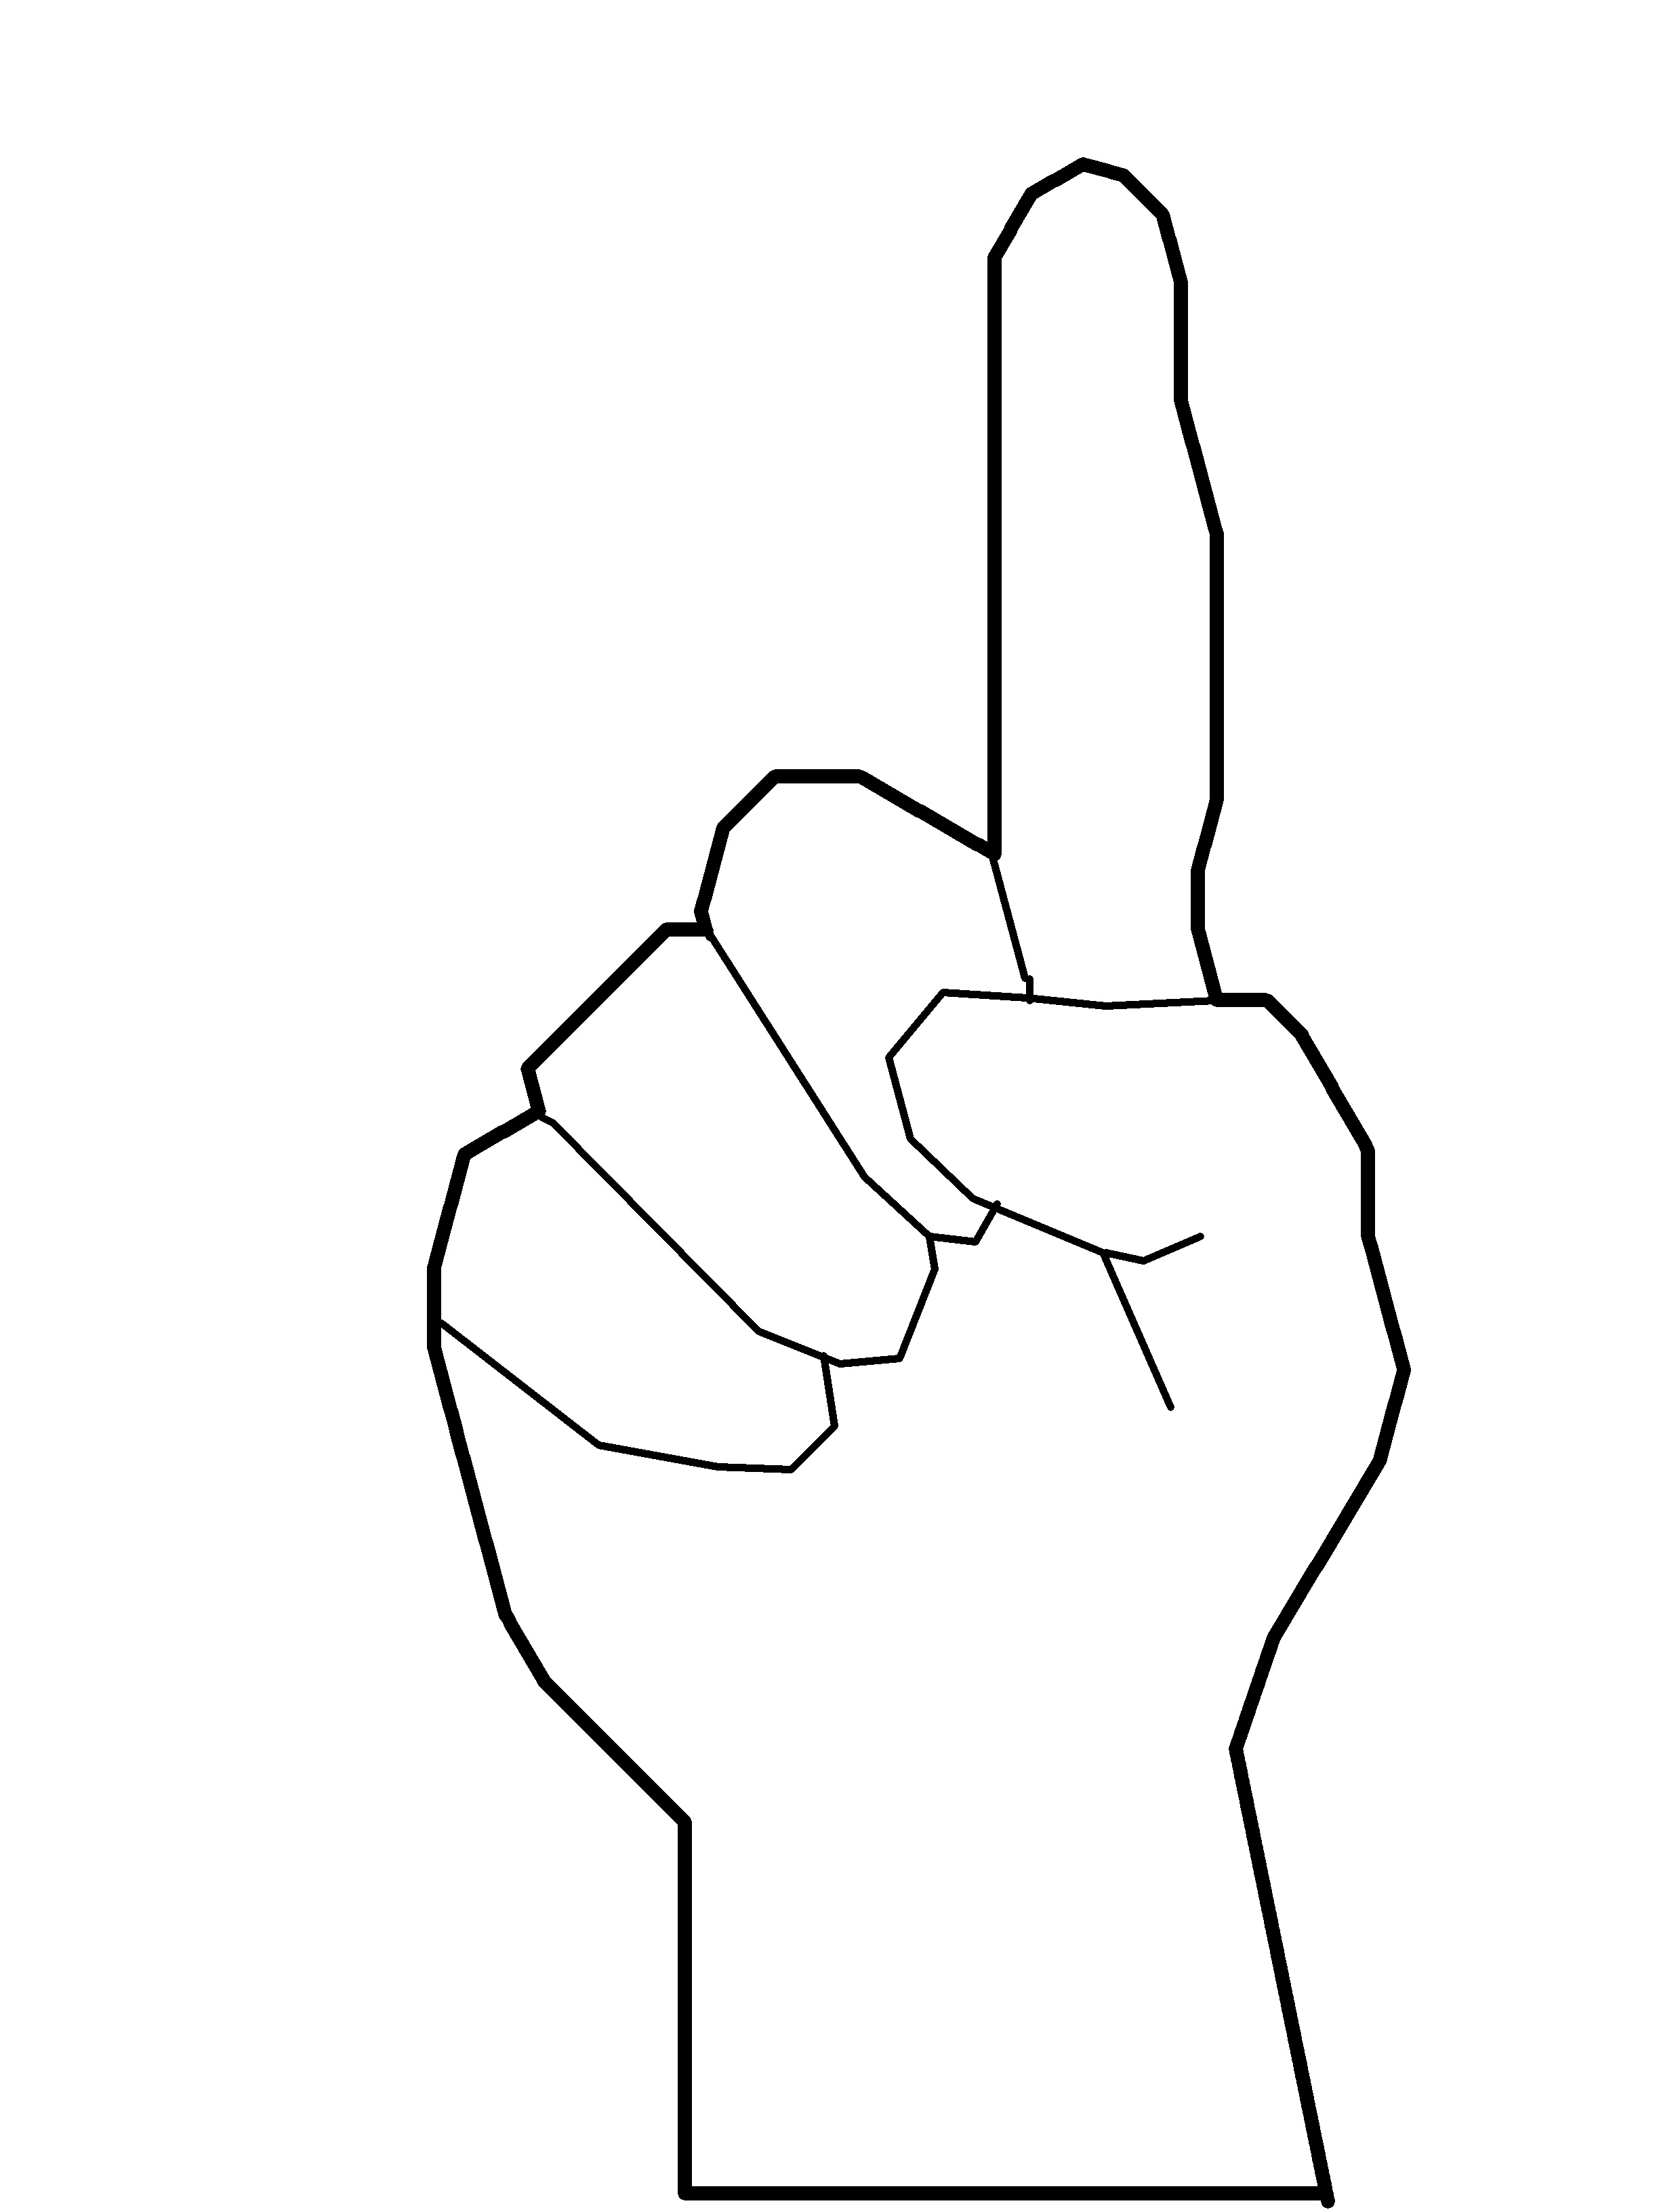 Pointing Finger Drawing at GetDrawings | Free download